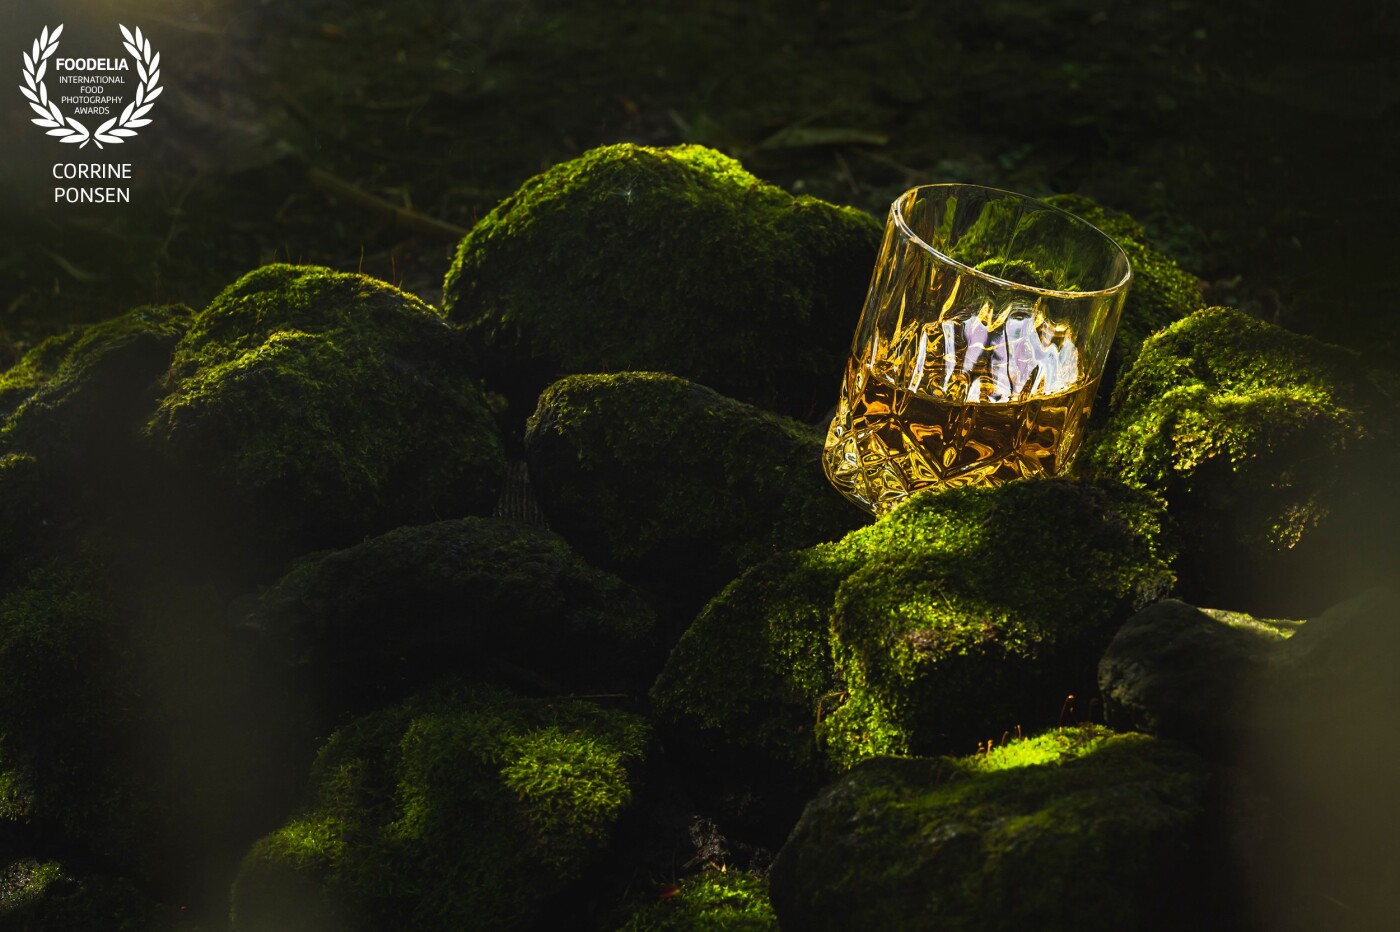 Whiskey on the rocks! Also for this picture I used my garden. Here is a whiskeyglass near the pond and the rocks are covered with moss. So I thought that would make a nice contrast with the whiskeyglass. In this picture I used 2 flashes.